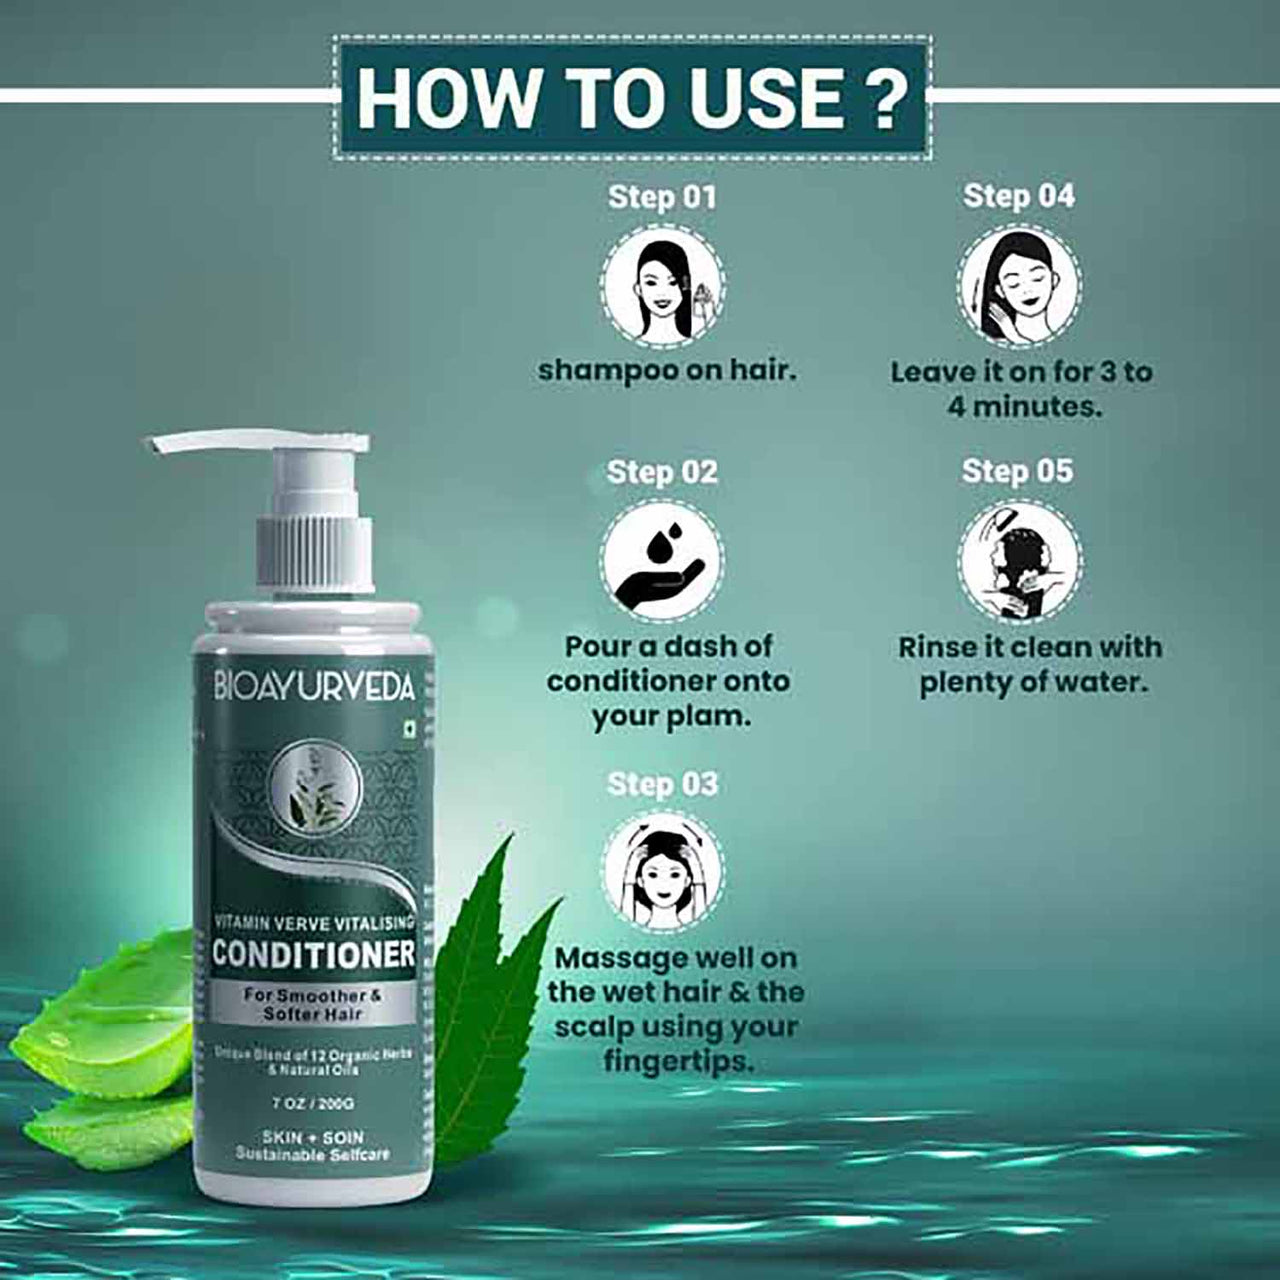 How to use Smoother and Shofter Hair Conditioner